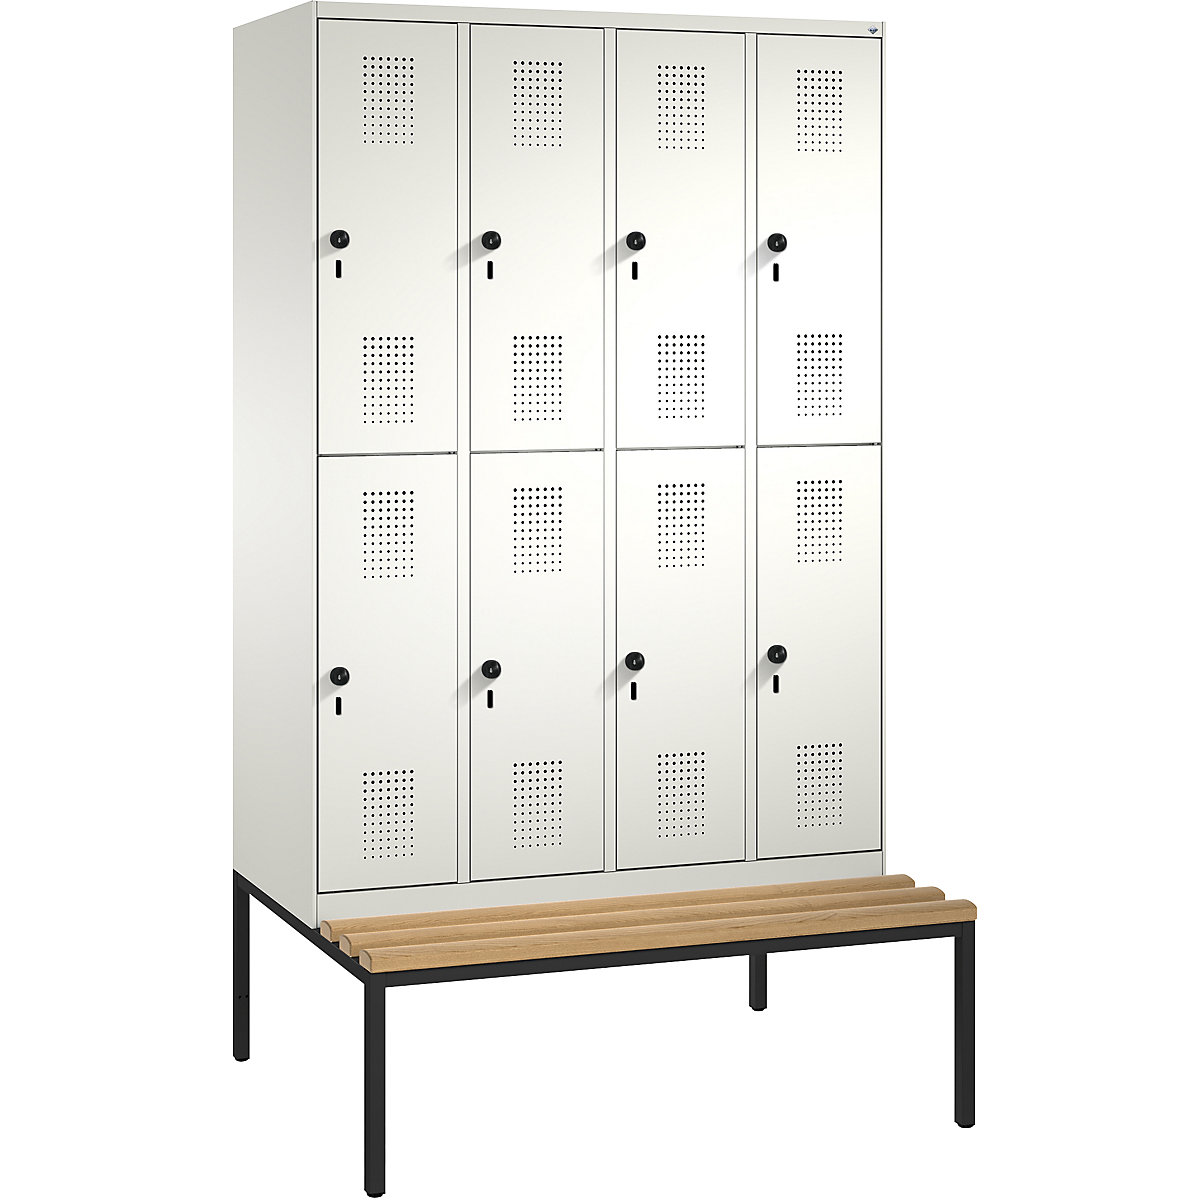 EVOLO cloakroom locker, double tier, with bench – C+P, 4 compartments, 2 shelf compartments each, compartment width 300 mm, pure white / pure white-13